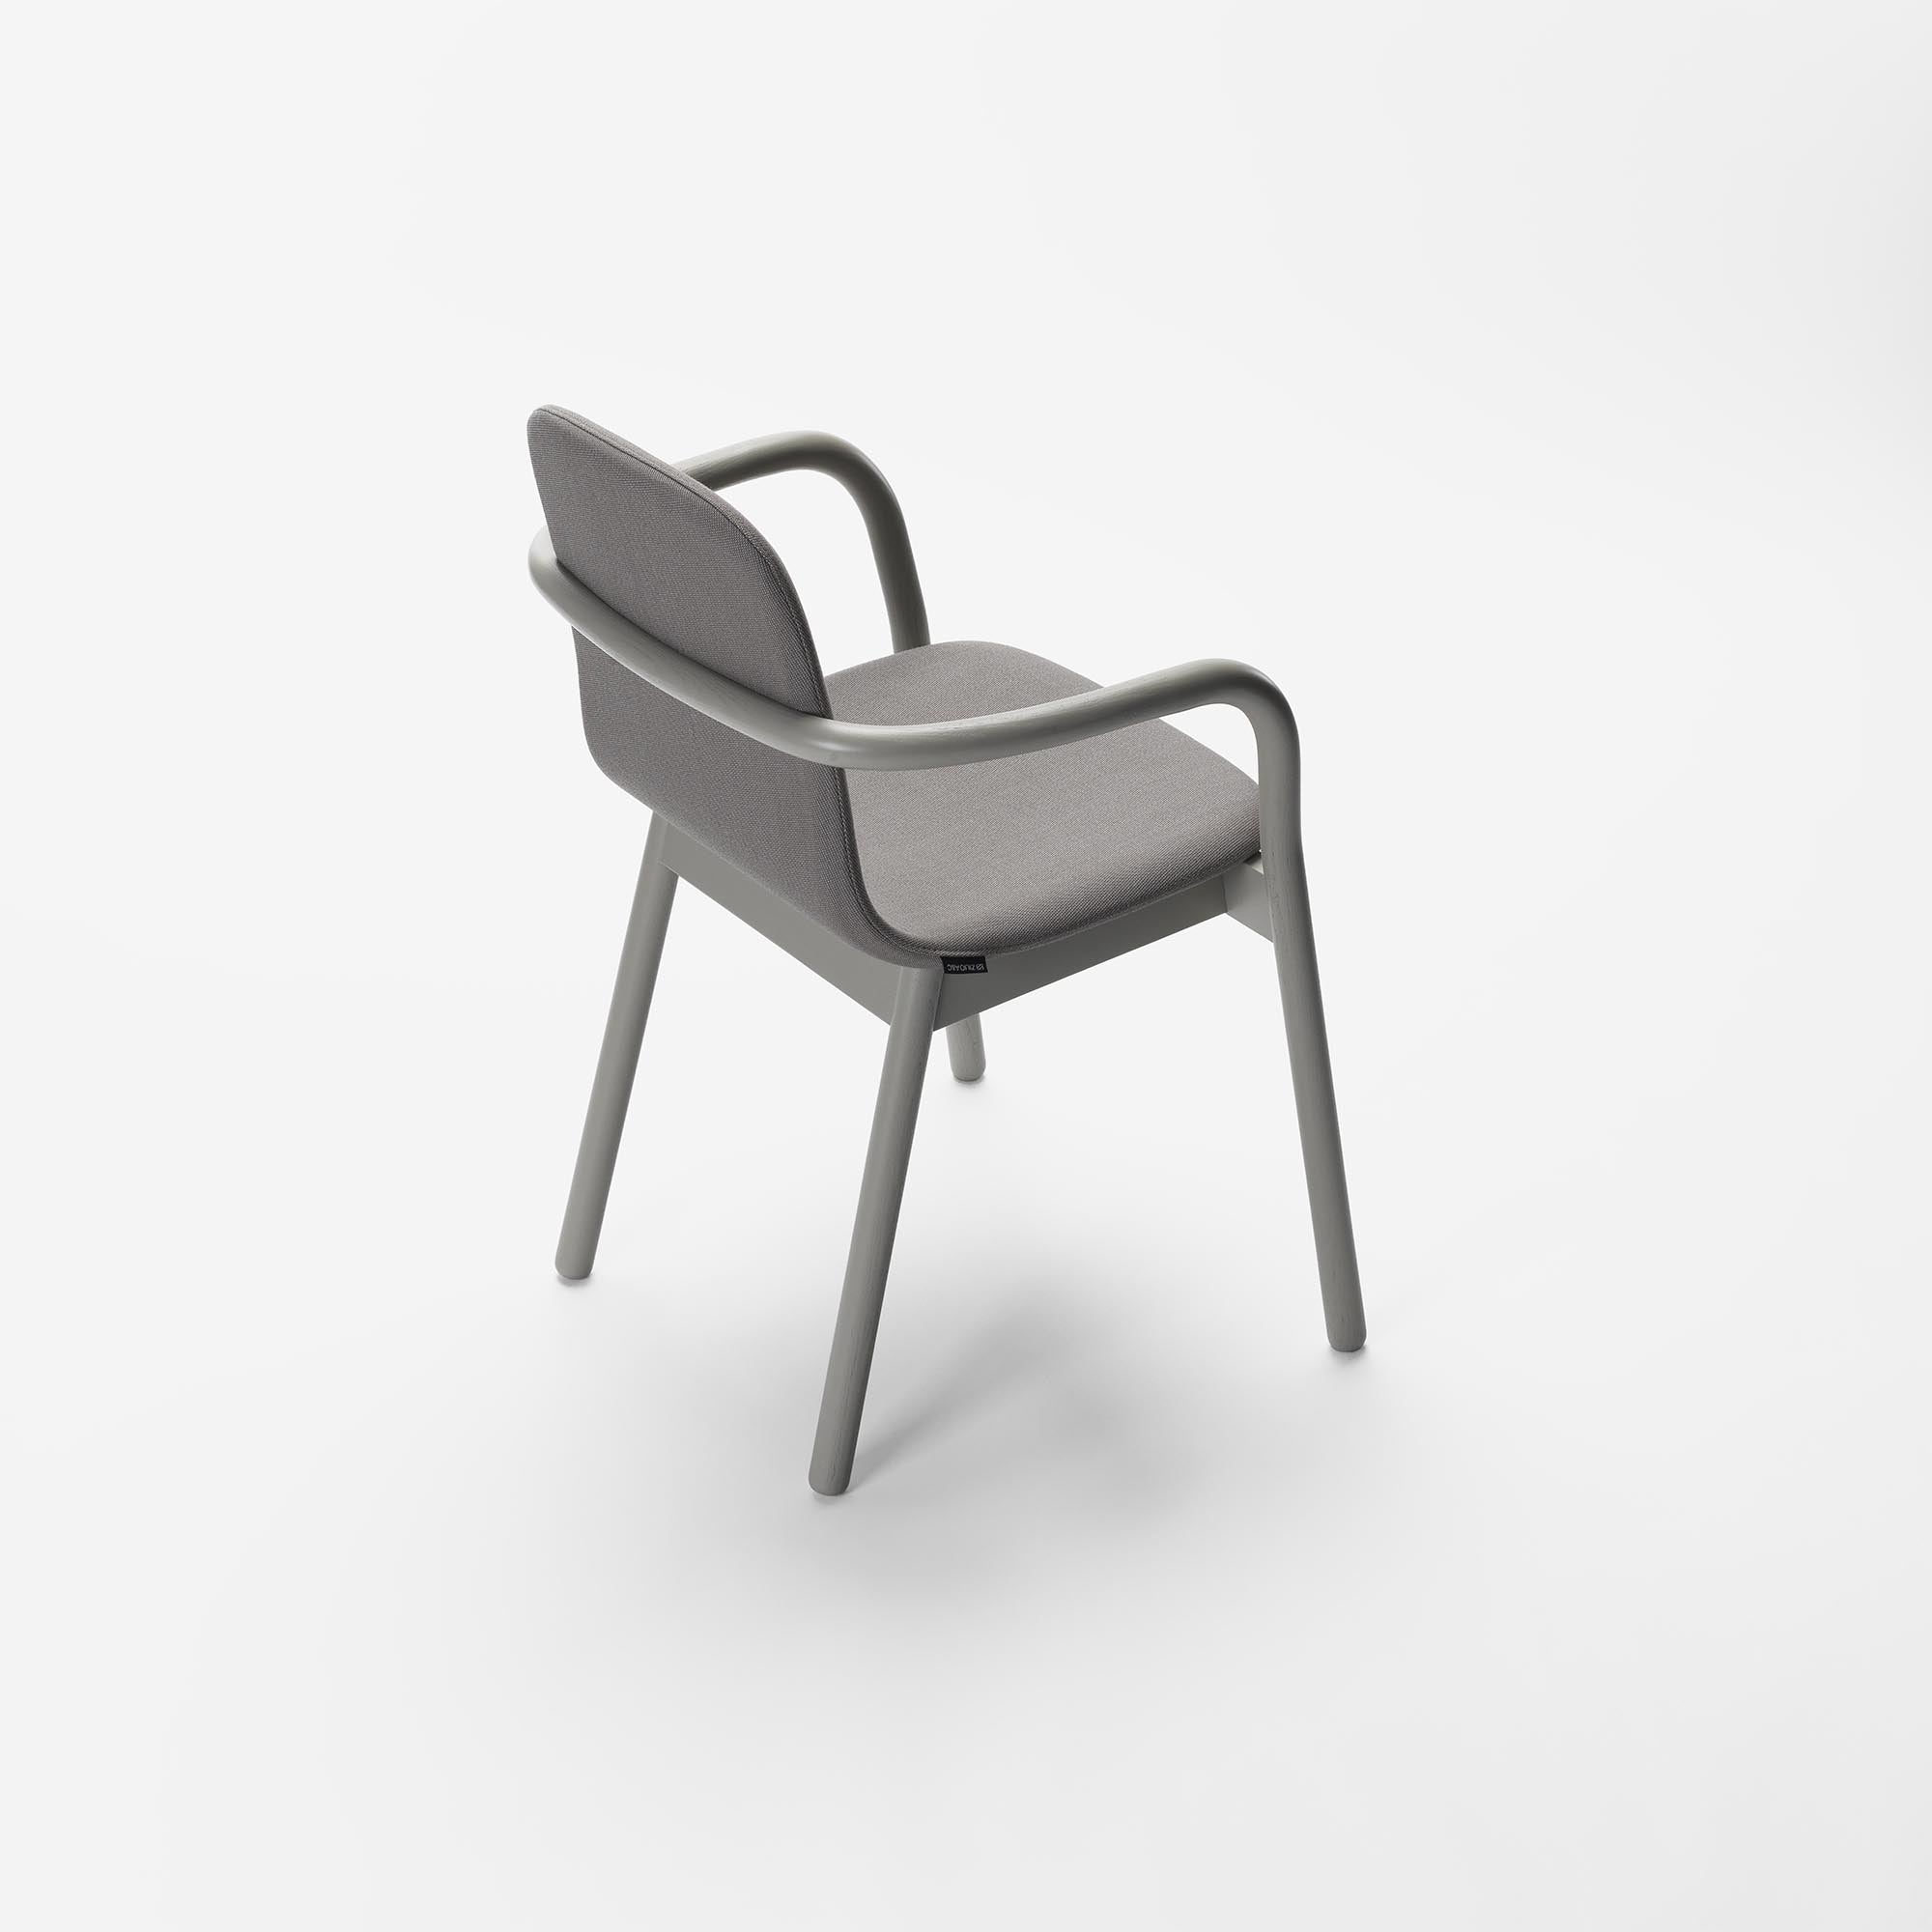 HUG ARMCHAIR Lacquered Ash in Pebble Gray-Kvadrat Rime top half-back side view